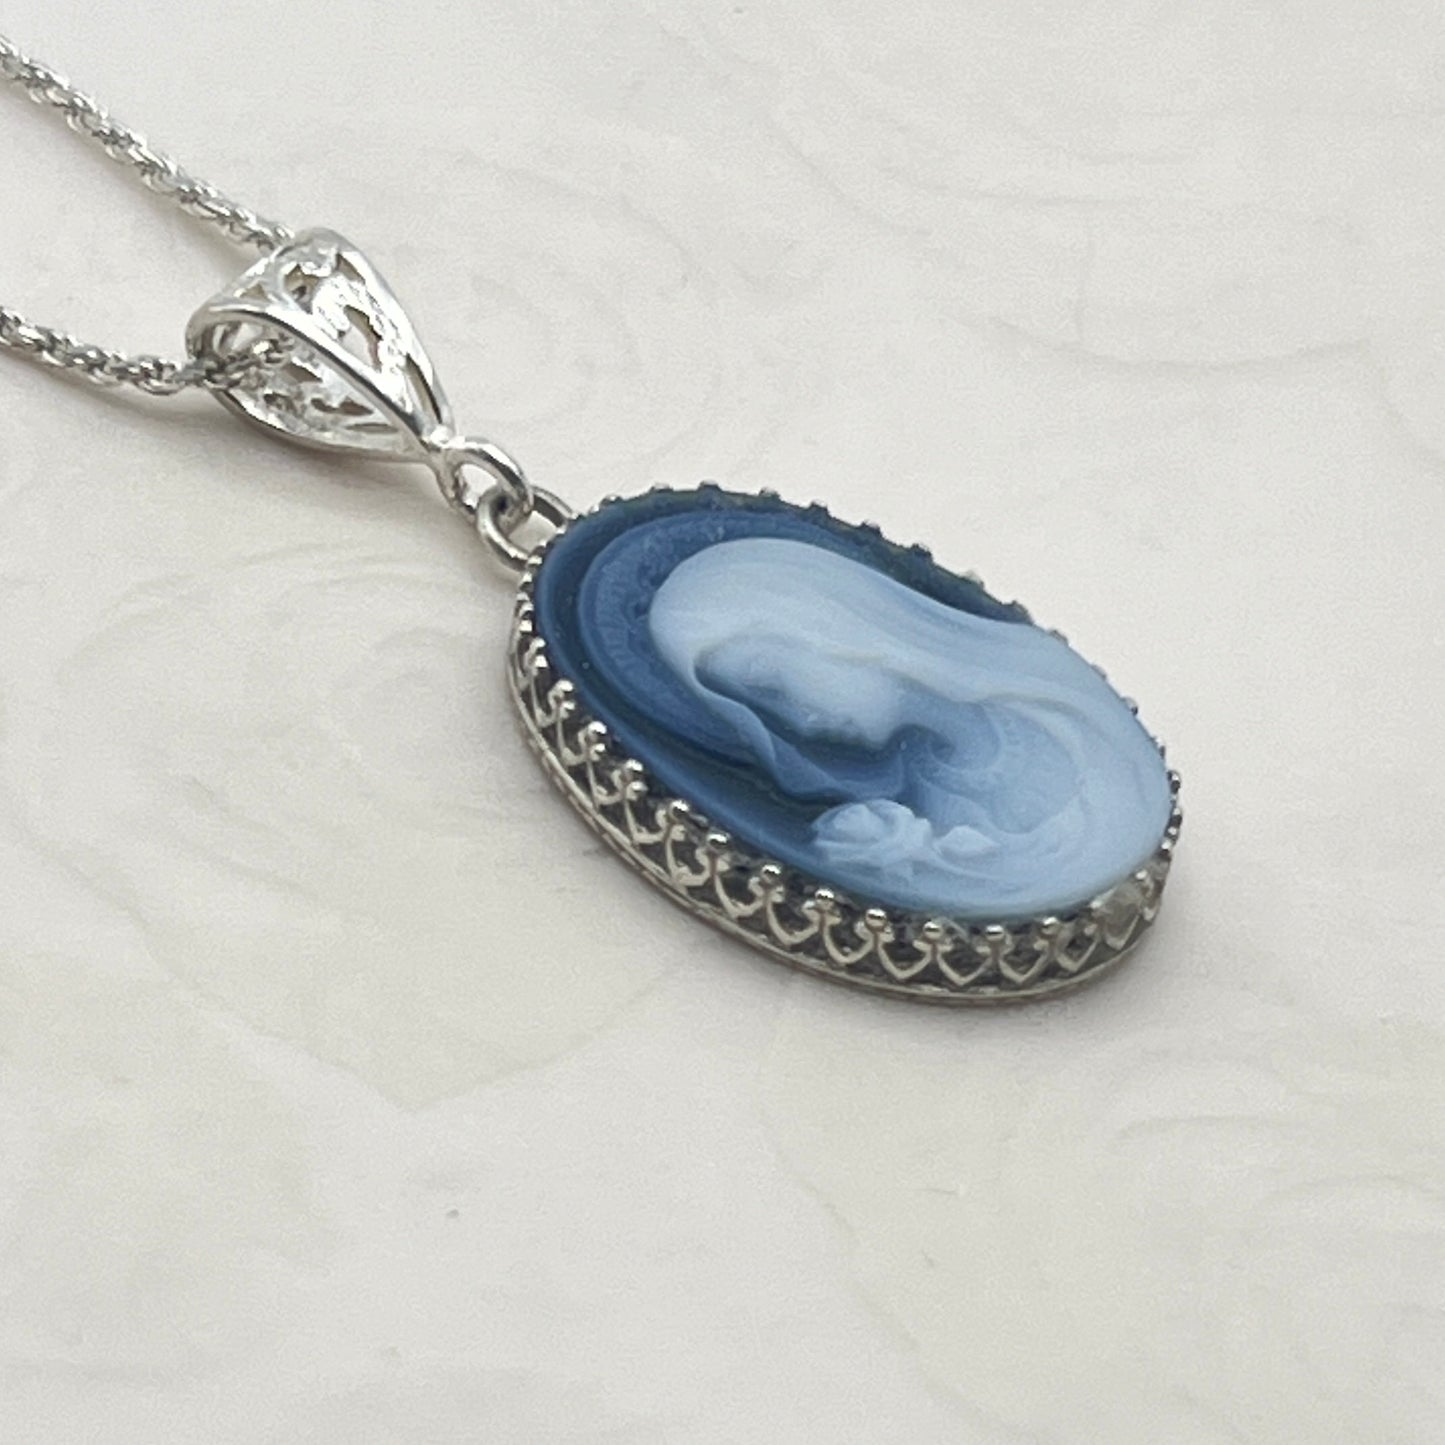 Blessed Mother Mary Blue Cameo Necklace, Religious Jewelry, Gifts for Women, Gemstone Cameo, Easter Jewelry Gifts